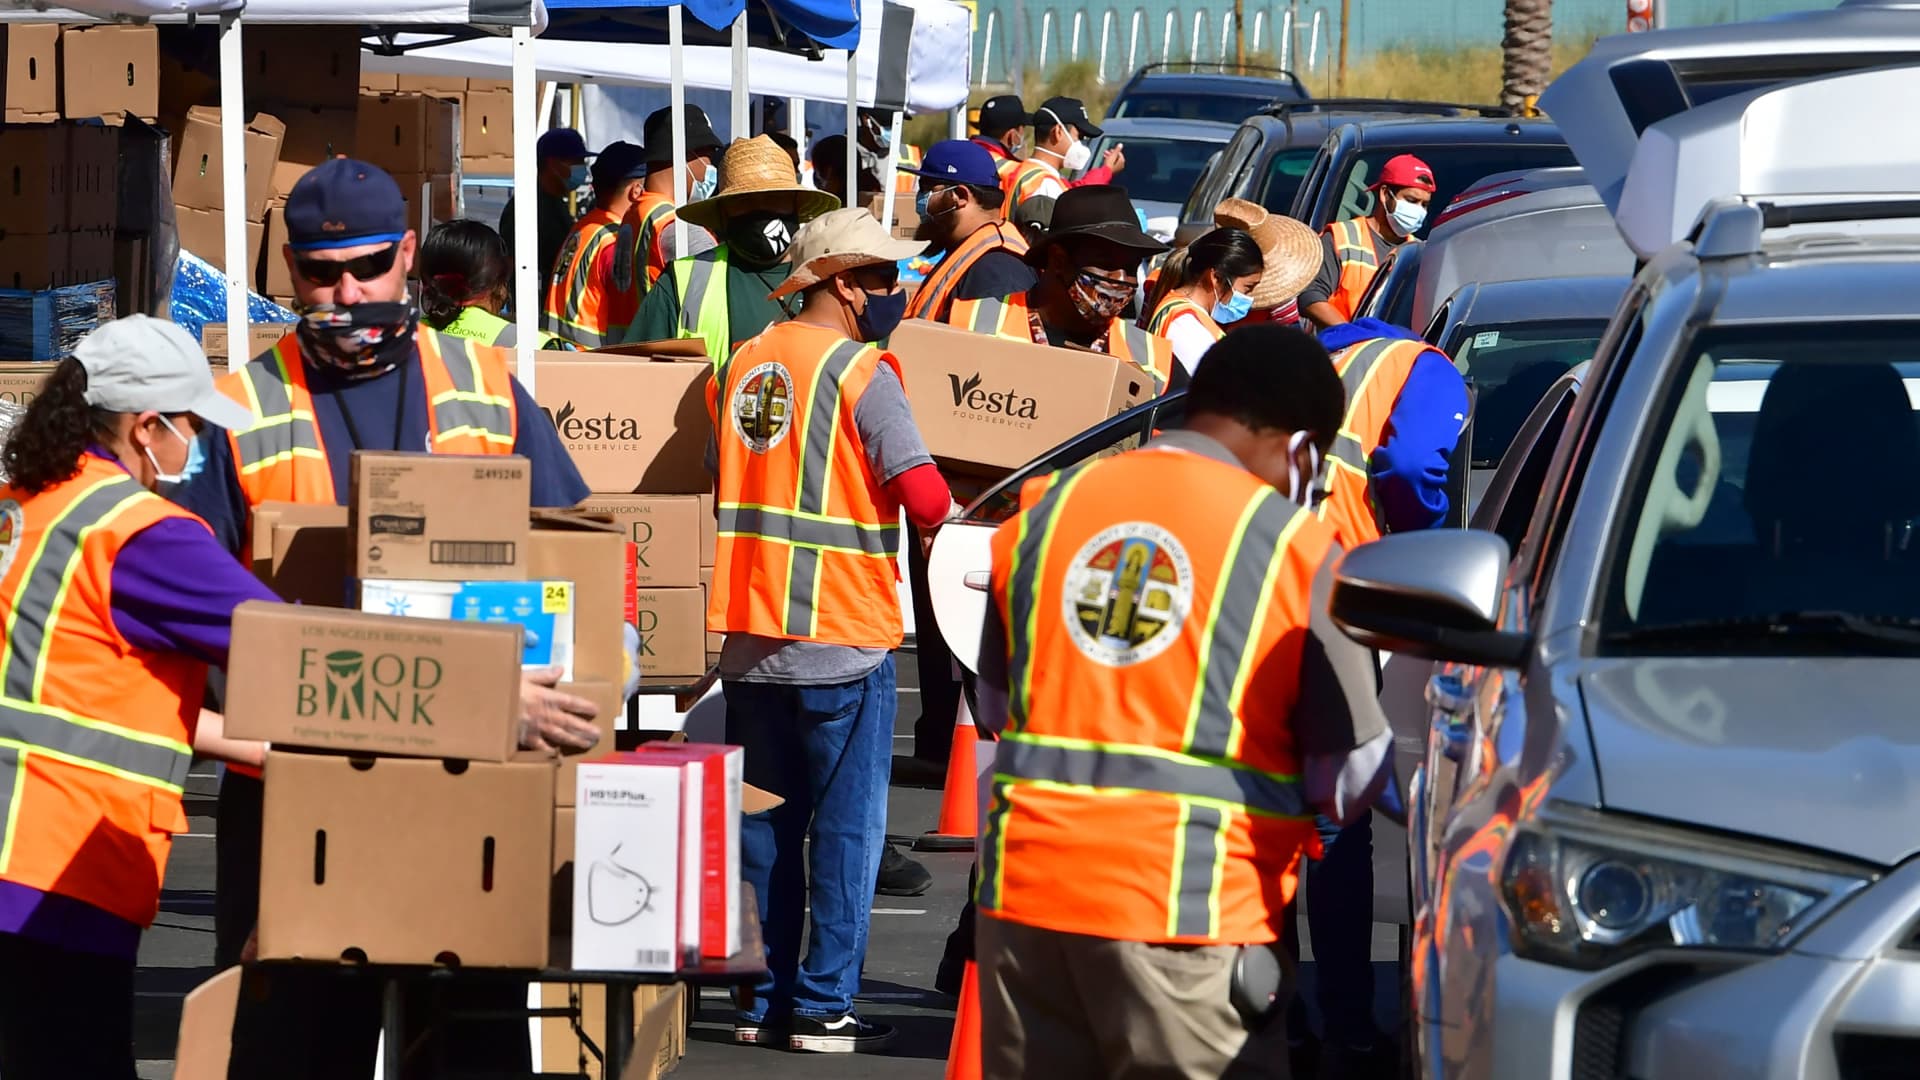 Los Angeles County Regional Food Bank workers help with food distribution in Willowbrook, California, on April 29, 2021.